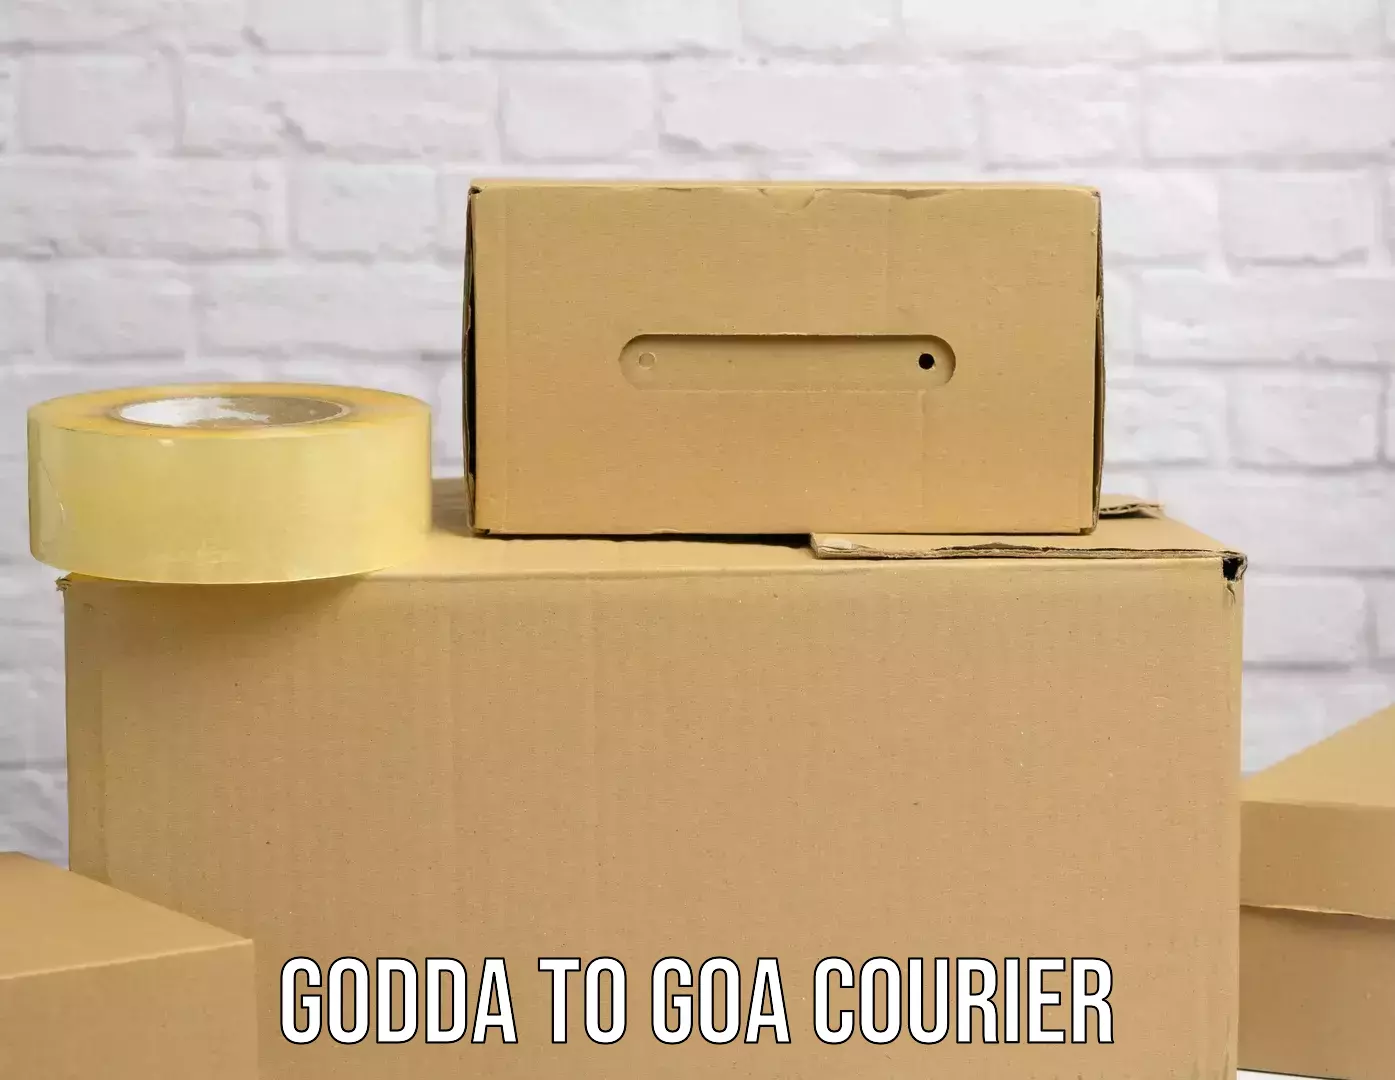 State-of-the-art courier technology Godda to Panaji